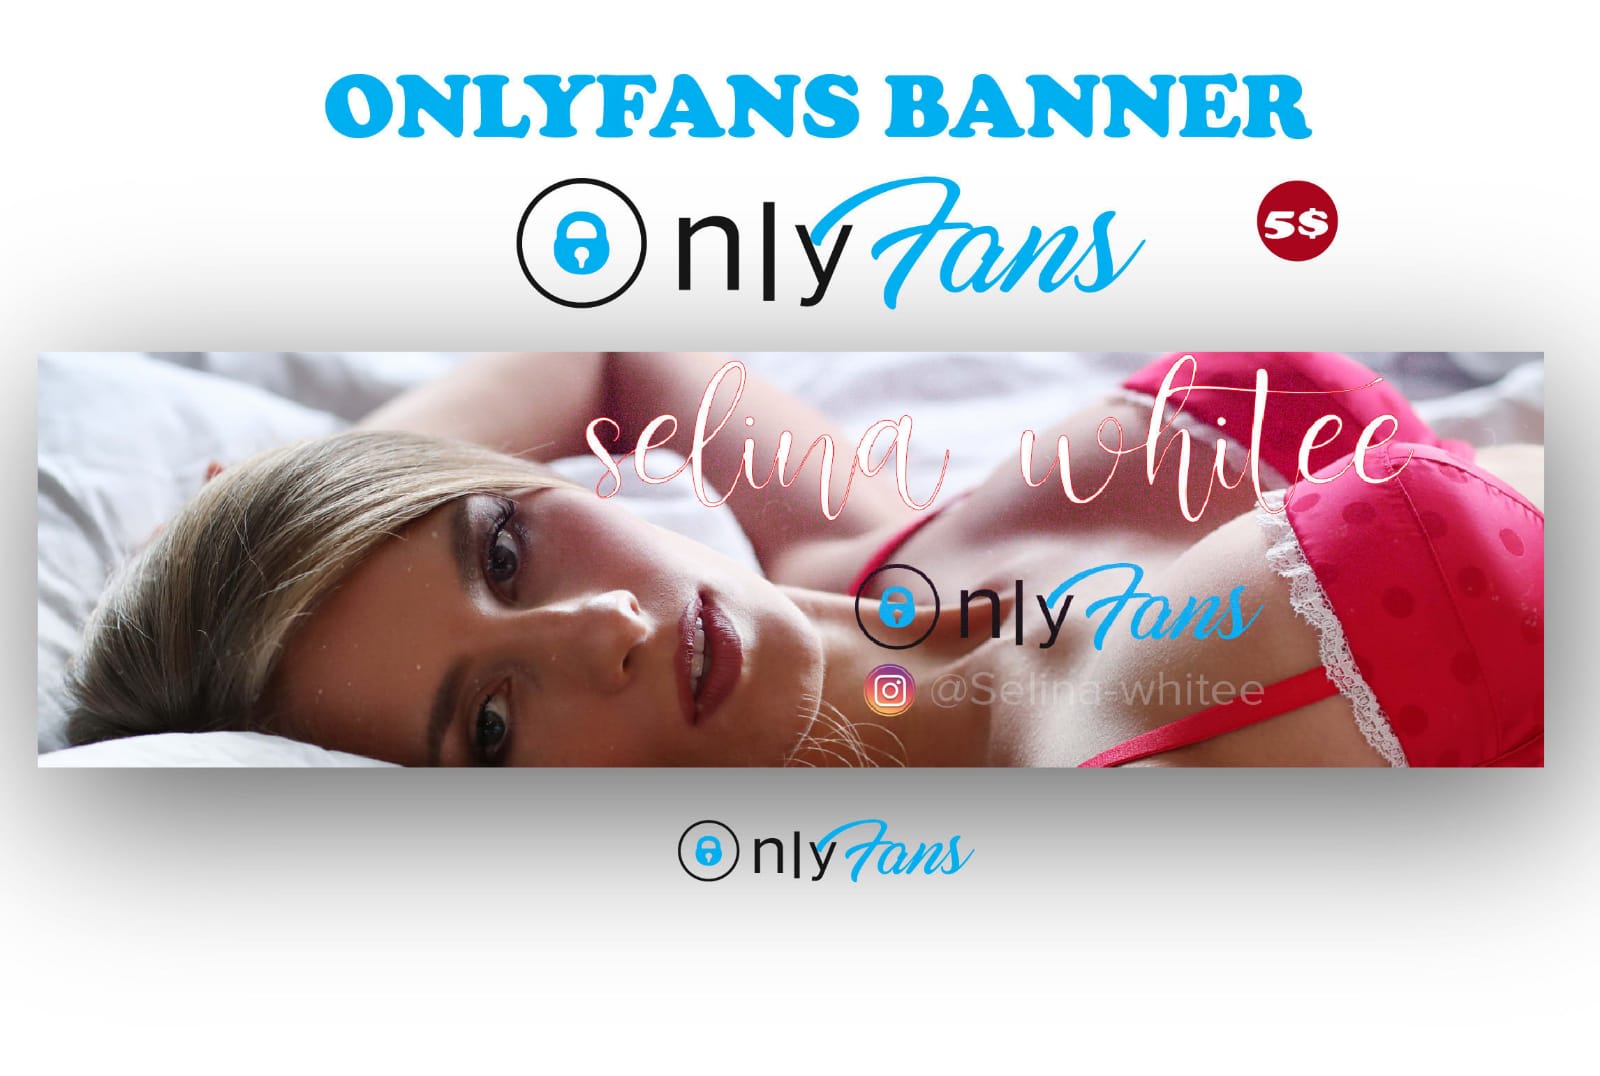 Only fans banner dimensions